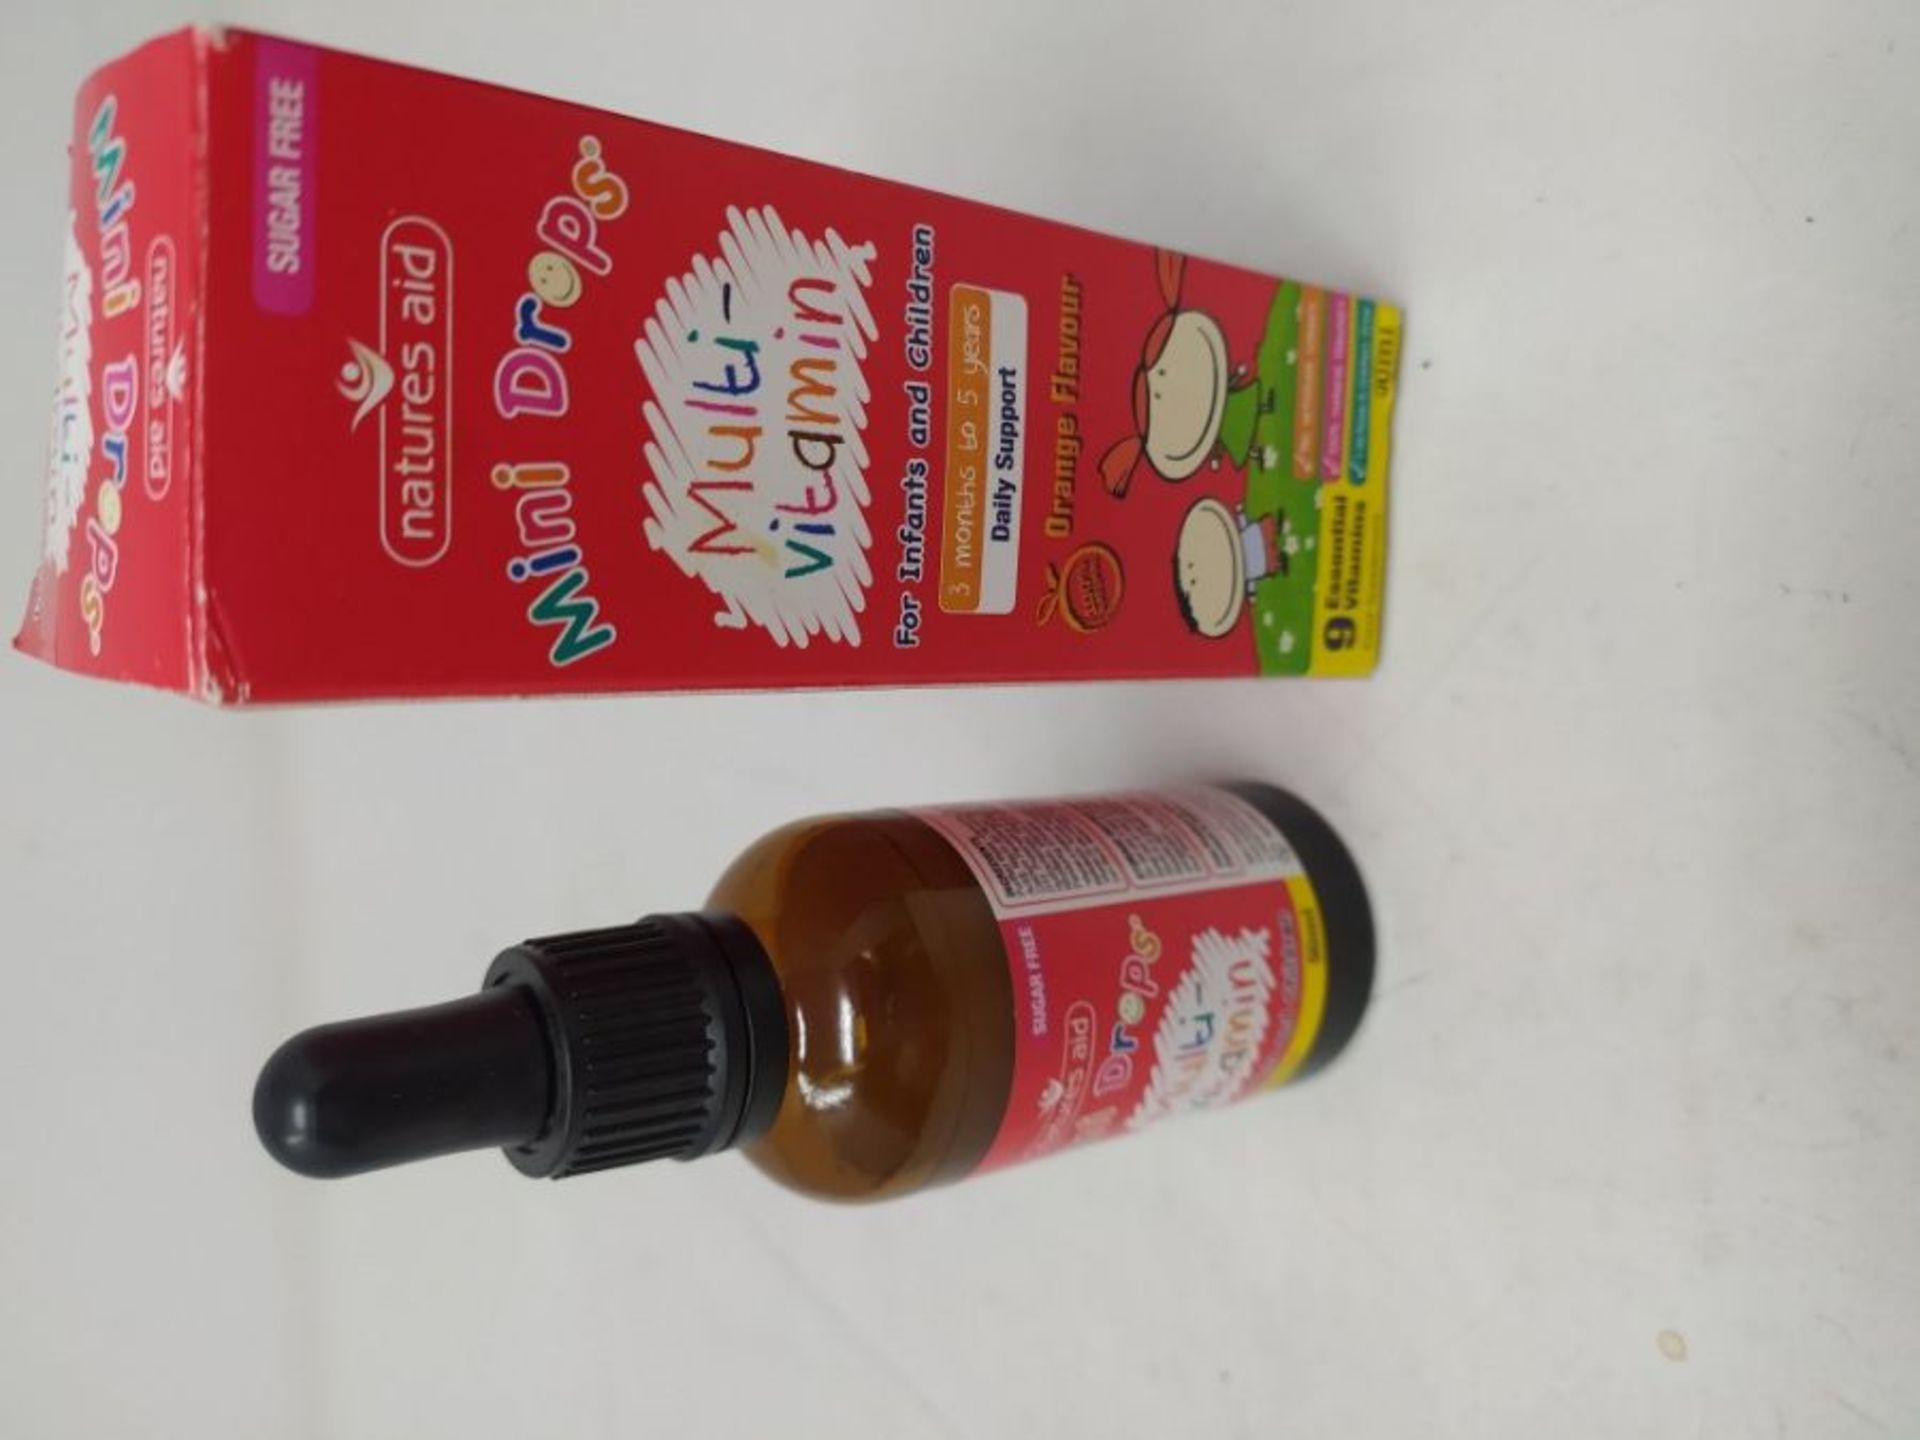 Natures Aid Mini Drops Multi-vitamin for Infants and Children, Sugar Free, 50 ml - Image 2 of 2